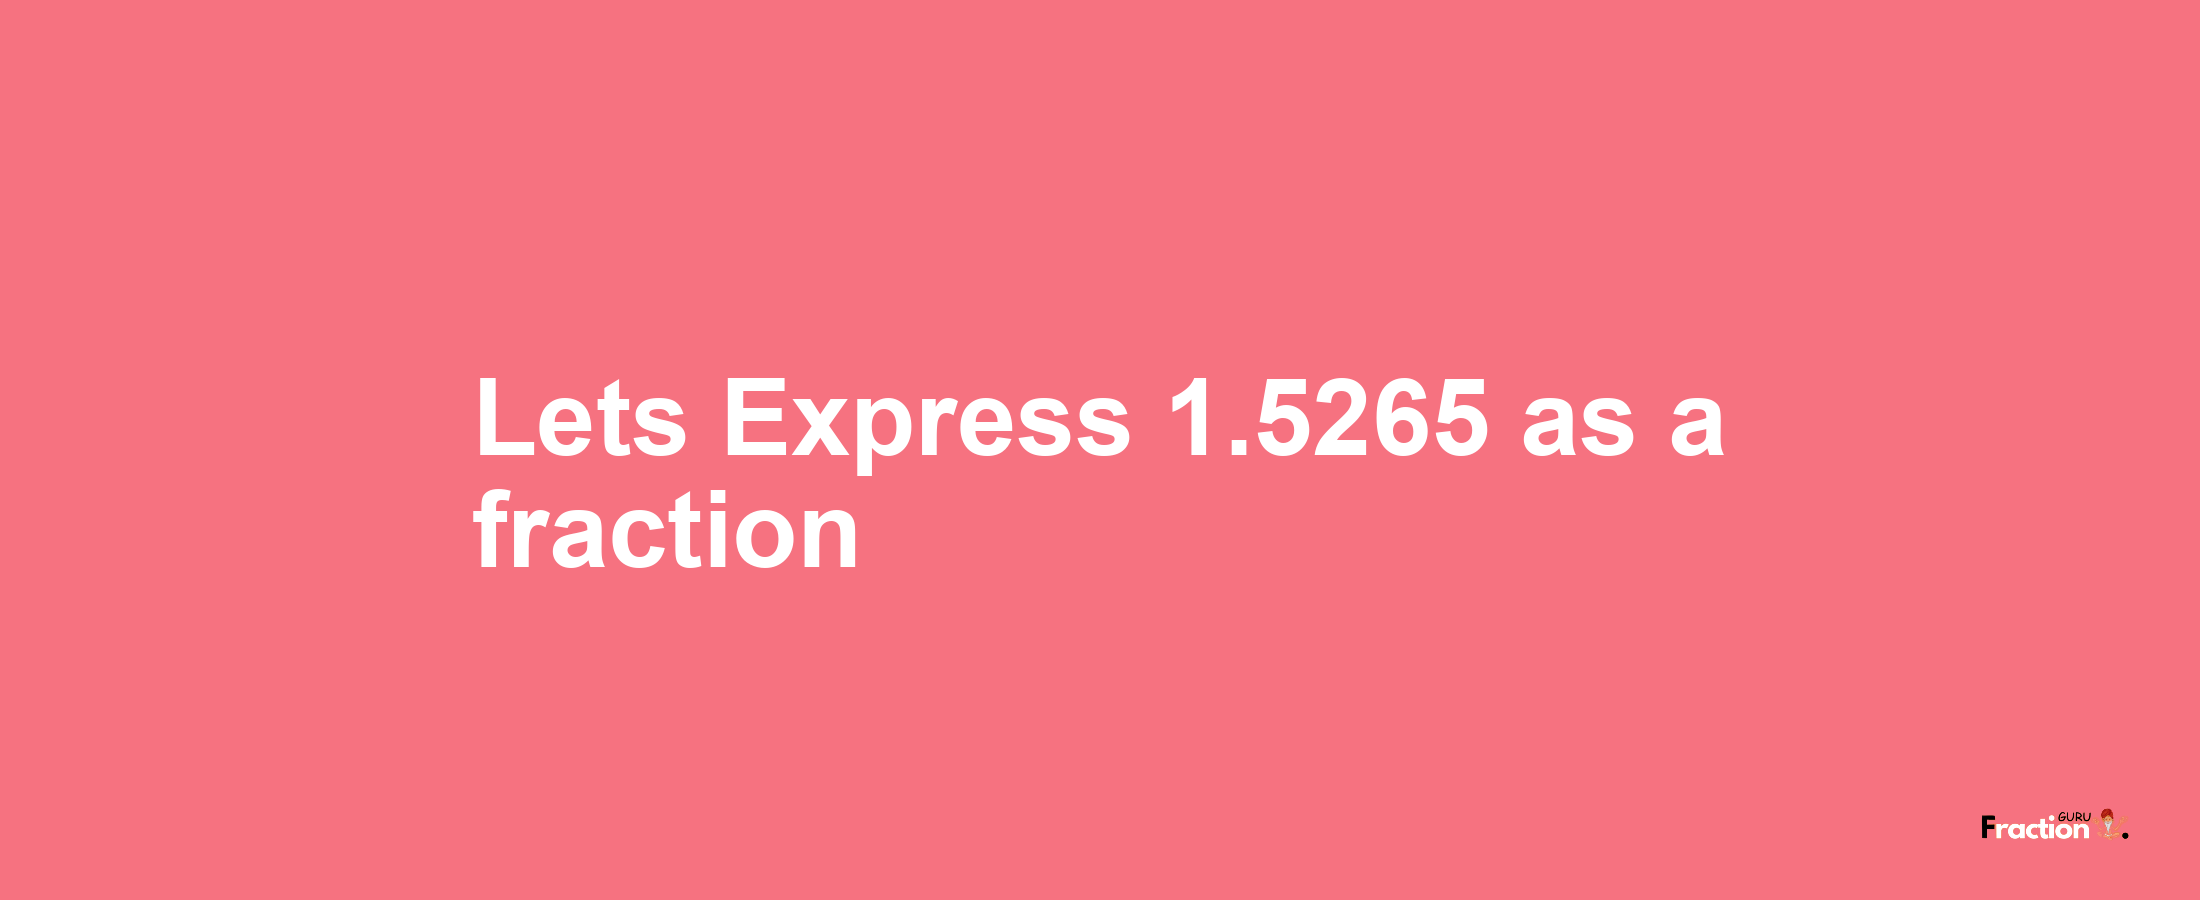 Lets Express 1.5265 as afraction